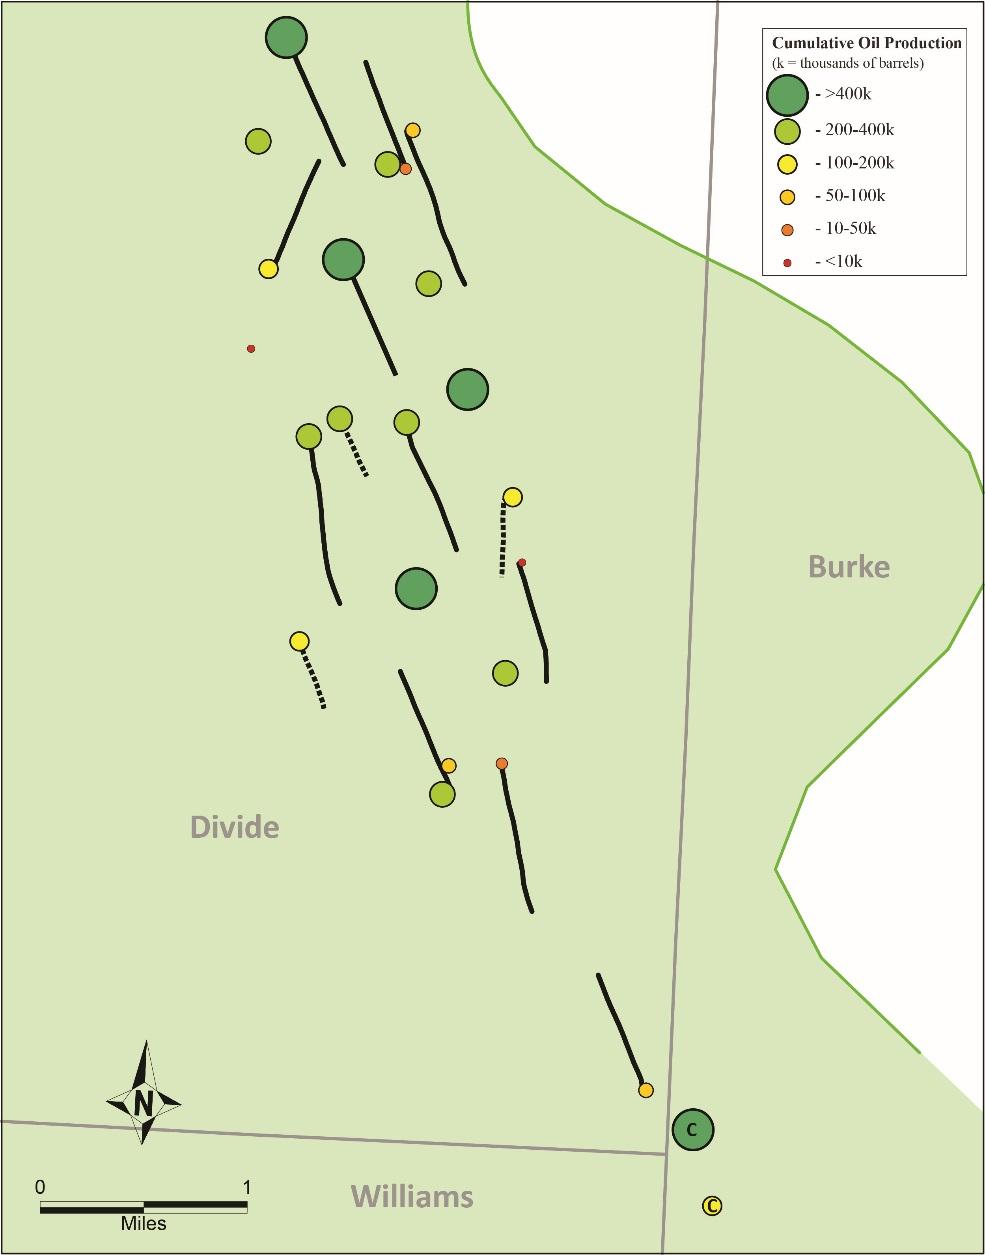 lower Interlake Production: Stoneview field area Beginning in 1999, 11 additional horizontal wells have been drilled (solid black lines) and completed plus 3 horizontal reentries of pre-existing